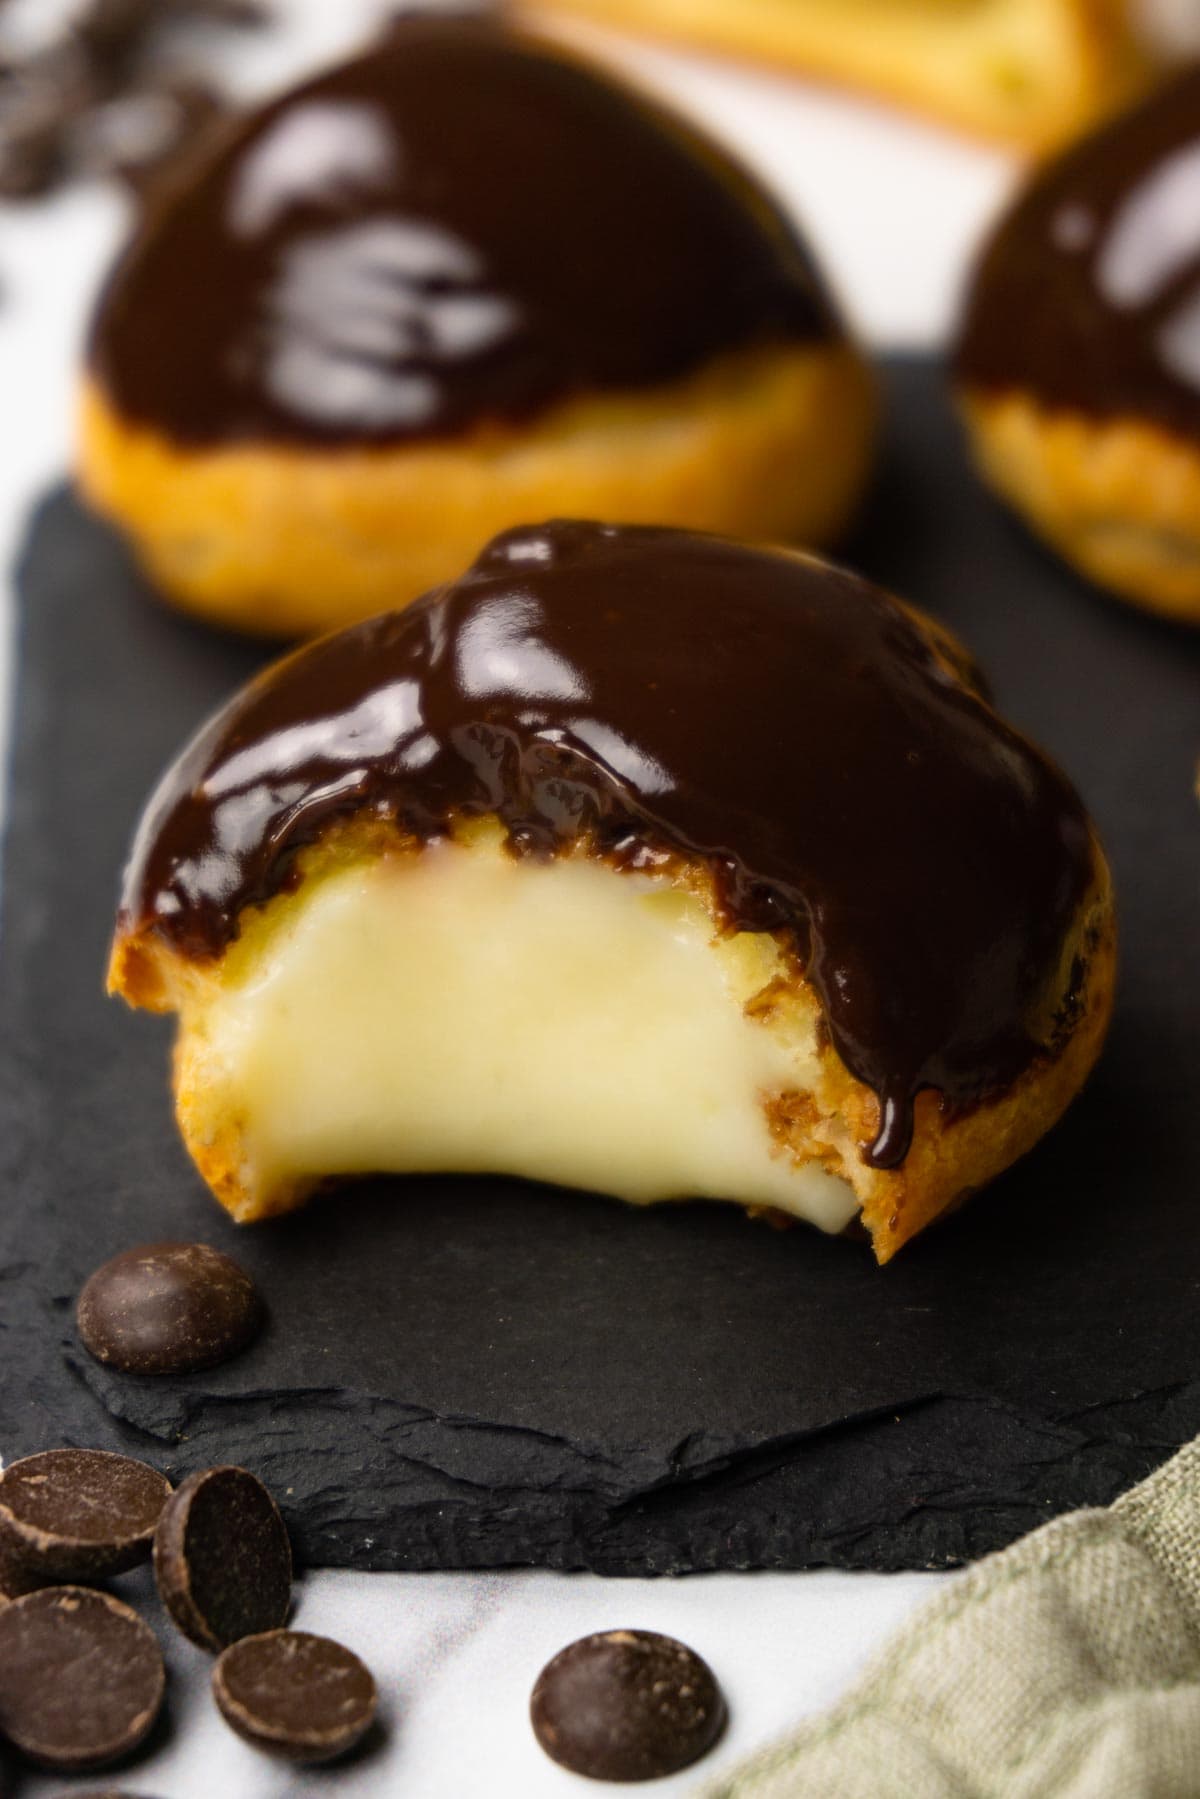 Profiteroles filled with pastry cream and glazed with chocolate ganache on a dark stone serving board, one bite is taken from one of the profiteroles.